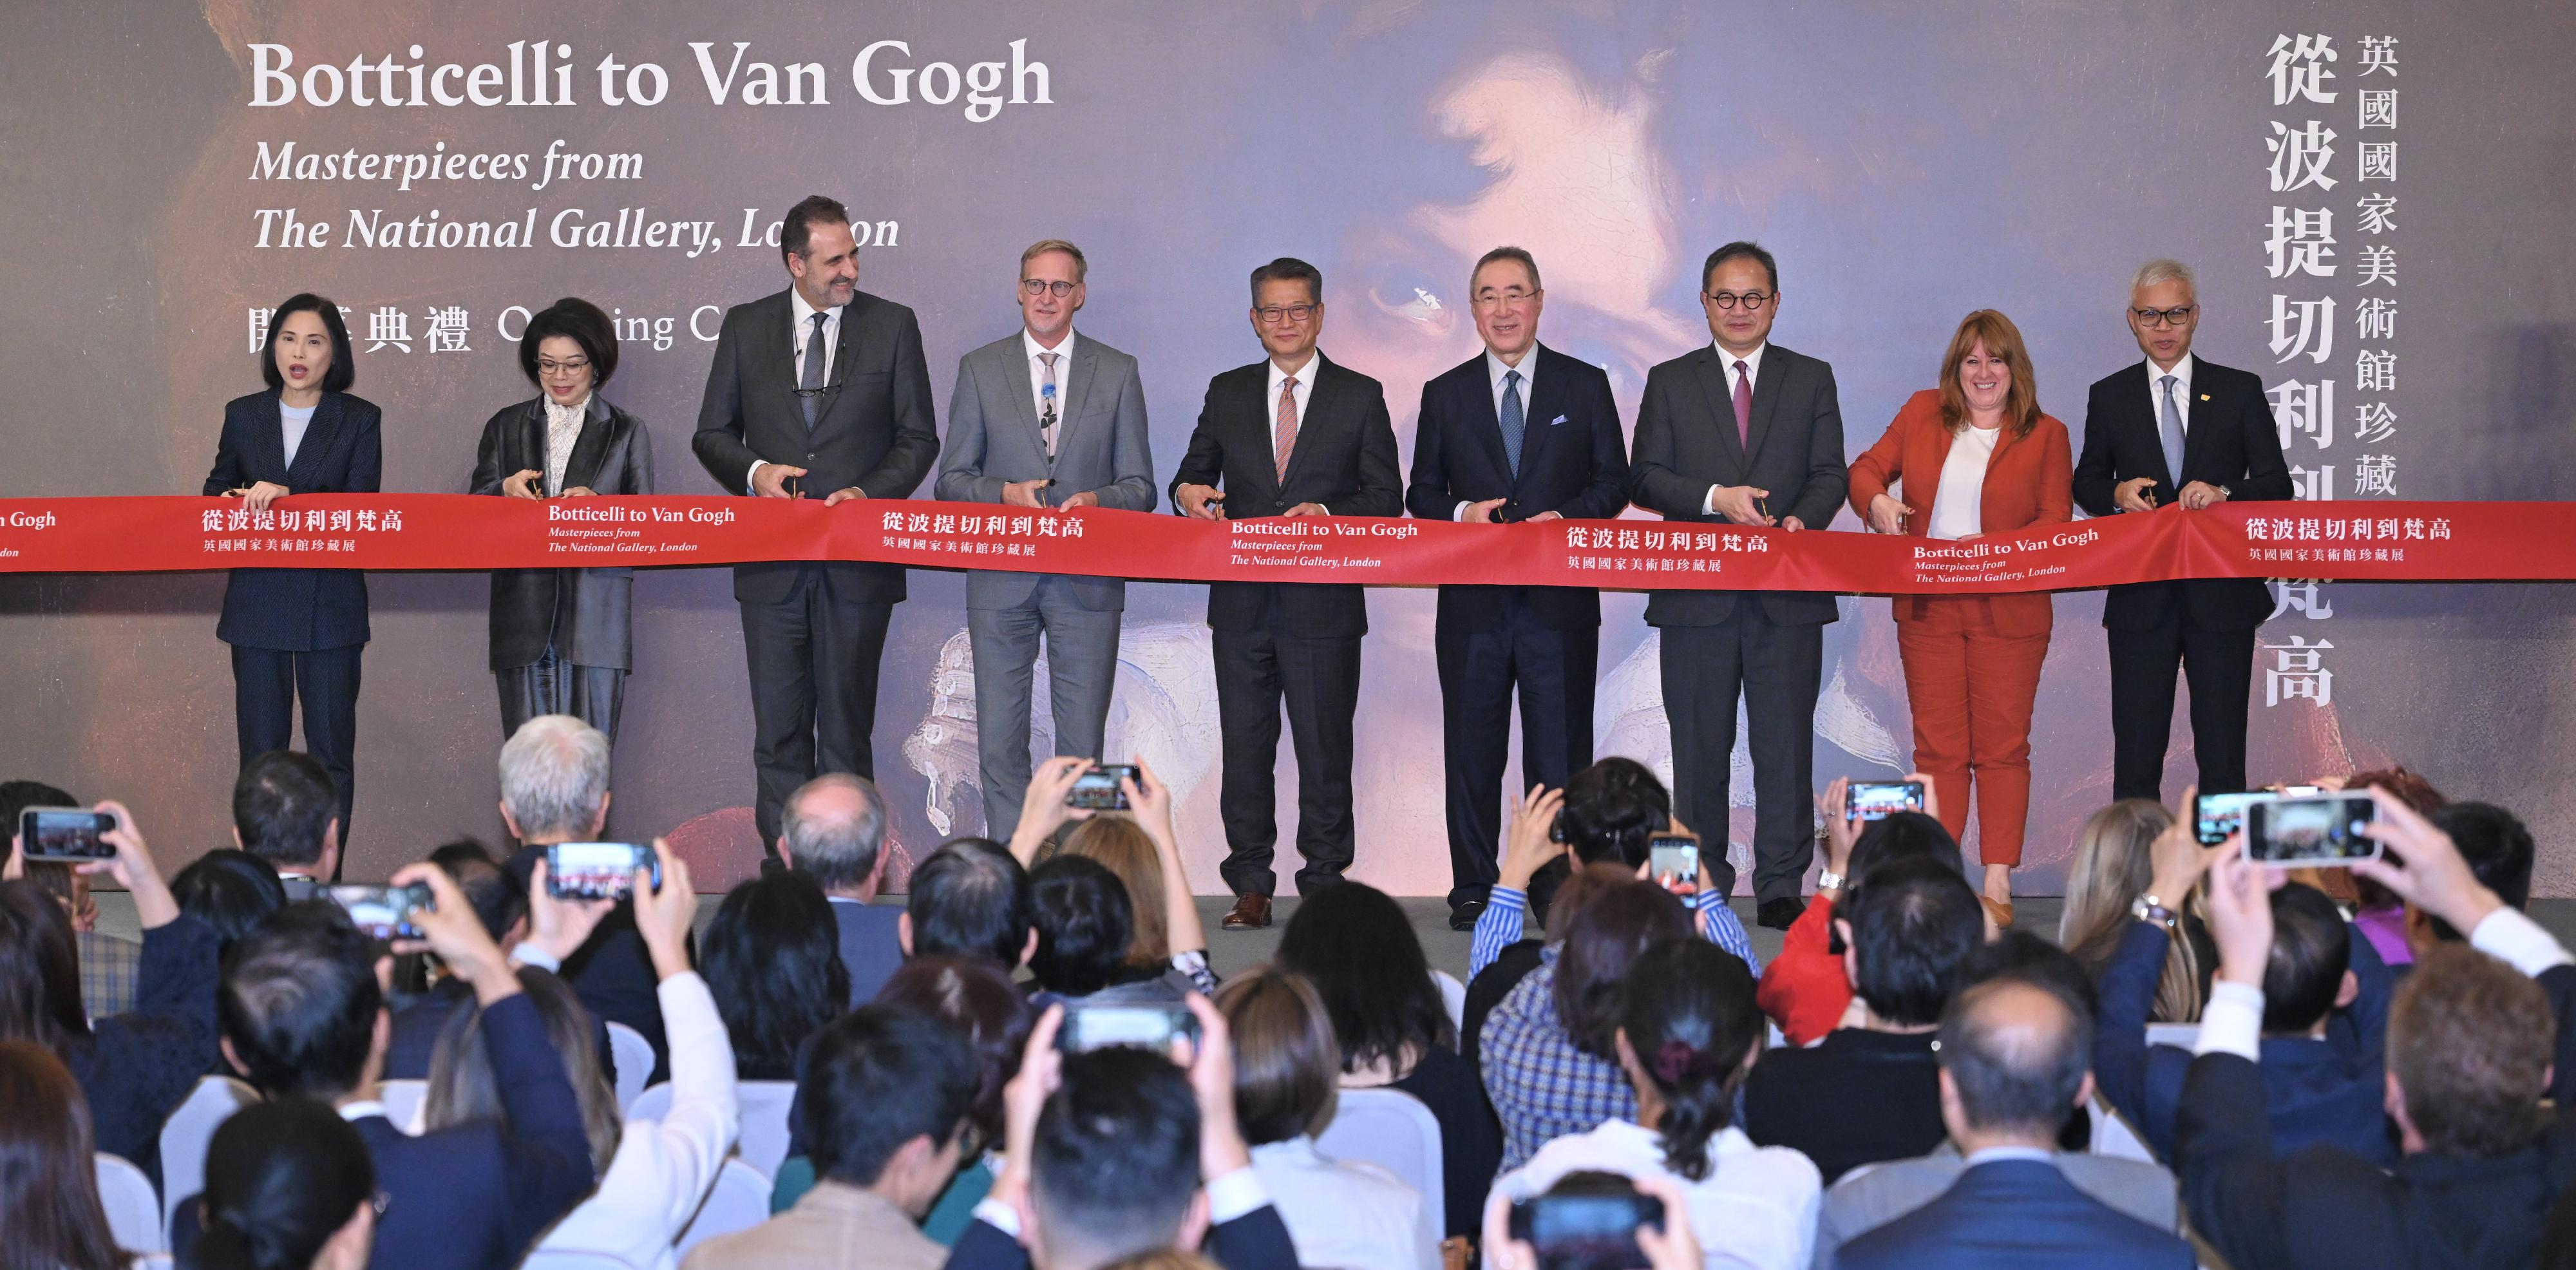 The Financial Secretary, Mr Paul Chan, attended the opening ceremony of the "Botticelli to Van Gogh: Masterpieces from the National Gallery, London" Special Exhibition today (November 21). Photo shows Mr Chan (centre); the British Consul General to Hong Kong and Macao, Mr Brian Davidson (fourth left); the Director of the National Gallery, London, Dr Gabriele Finaldi (third left); the Chairman of the Board of the West Kowloon Cultural District Authority (WKCDA), Mr Henry Tang (fourth right); the Chairman of the Board of the Hong Kong Palace Museum (HKPM), Ms Winnie Tam (second left); the Chief Executive Officer of the WKCDA, Mrs Betty Fung (first left); the Museum Director of the HKPM, Dr Louis Ng (first right), and other guests officiating at the ribbon-cutting ceremony.